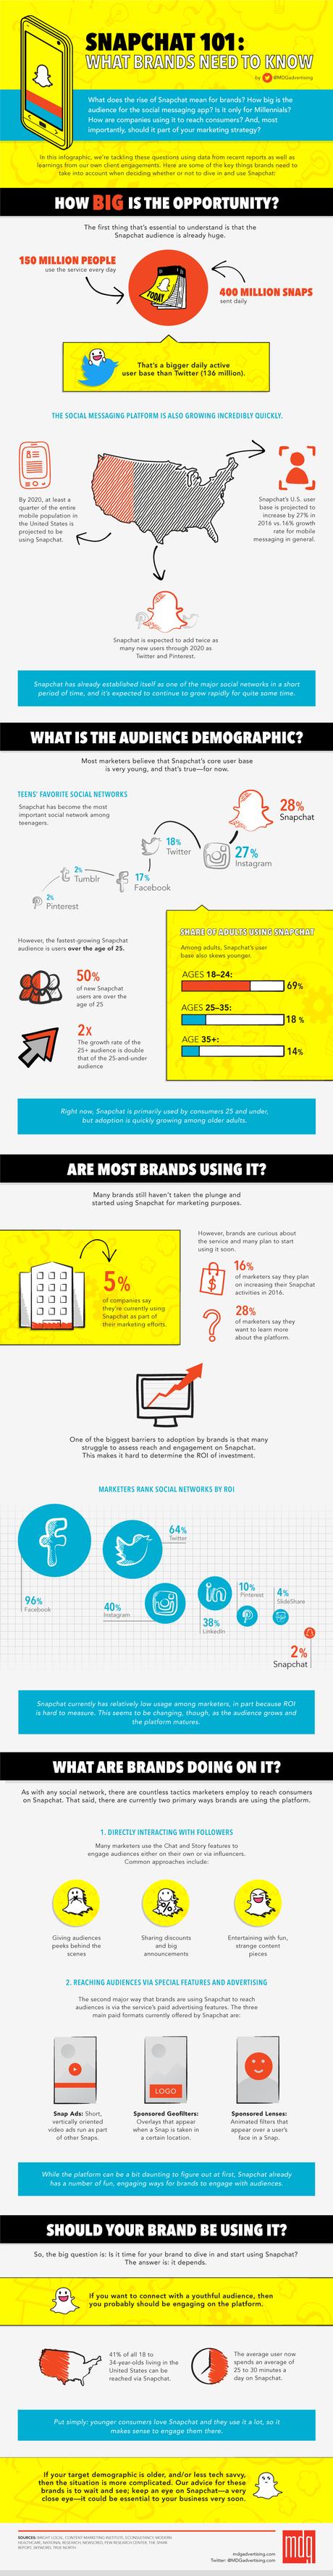 Snapchat 101: What Brands Need to Know [Infographic]